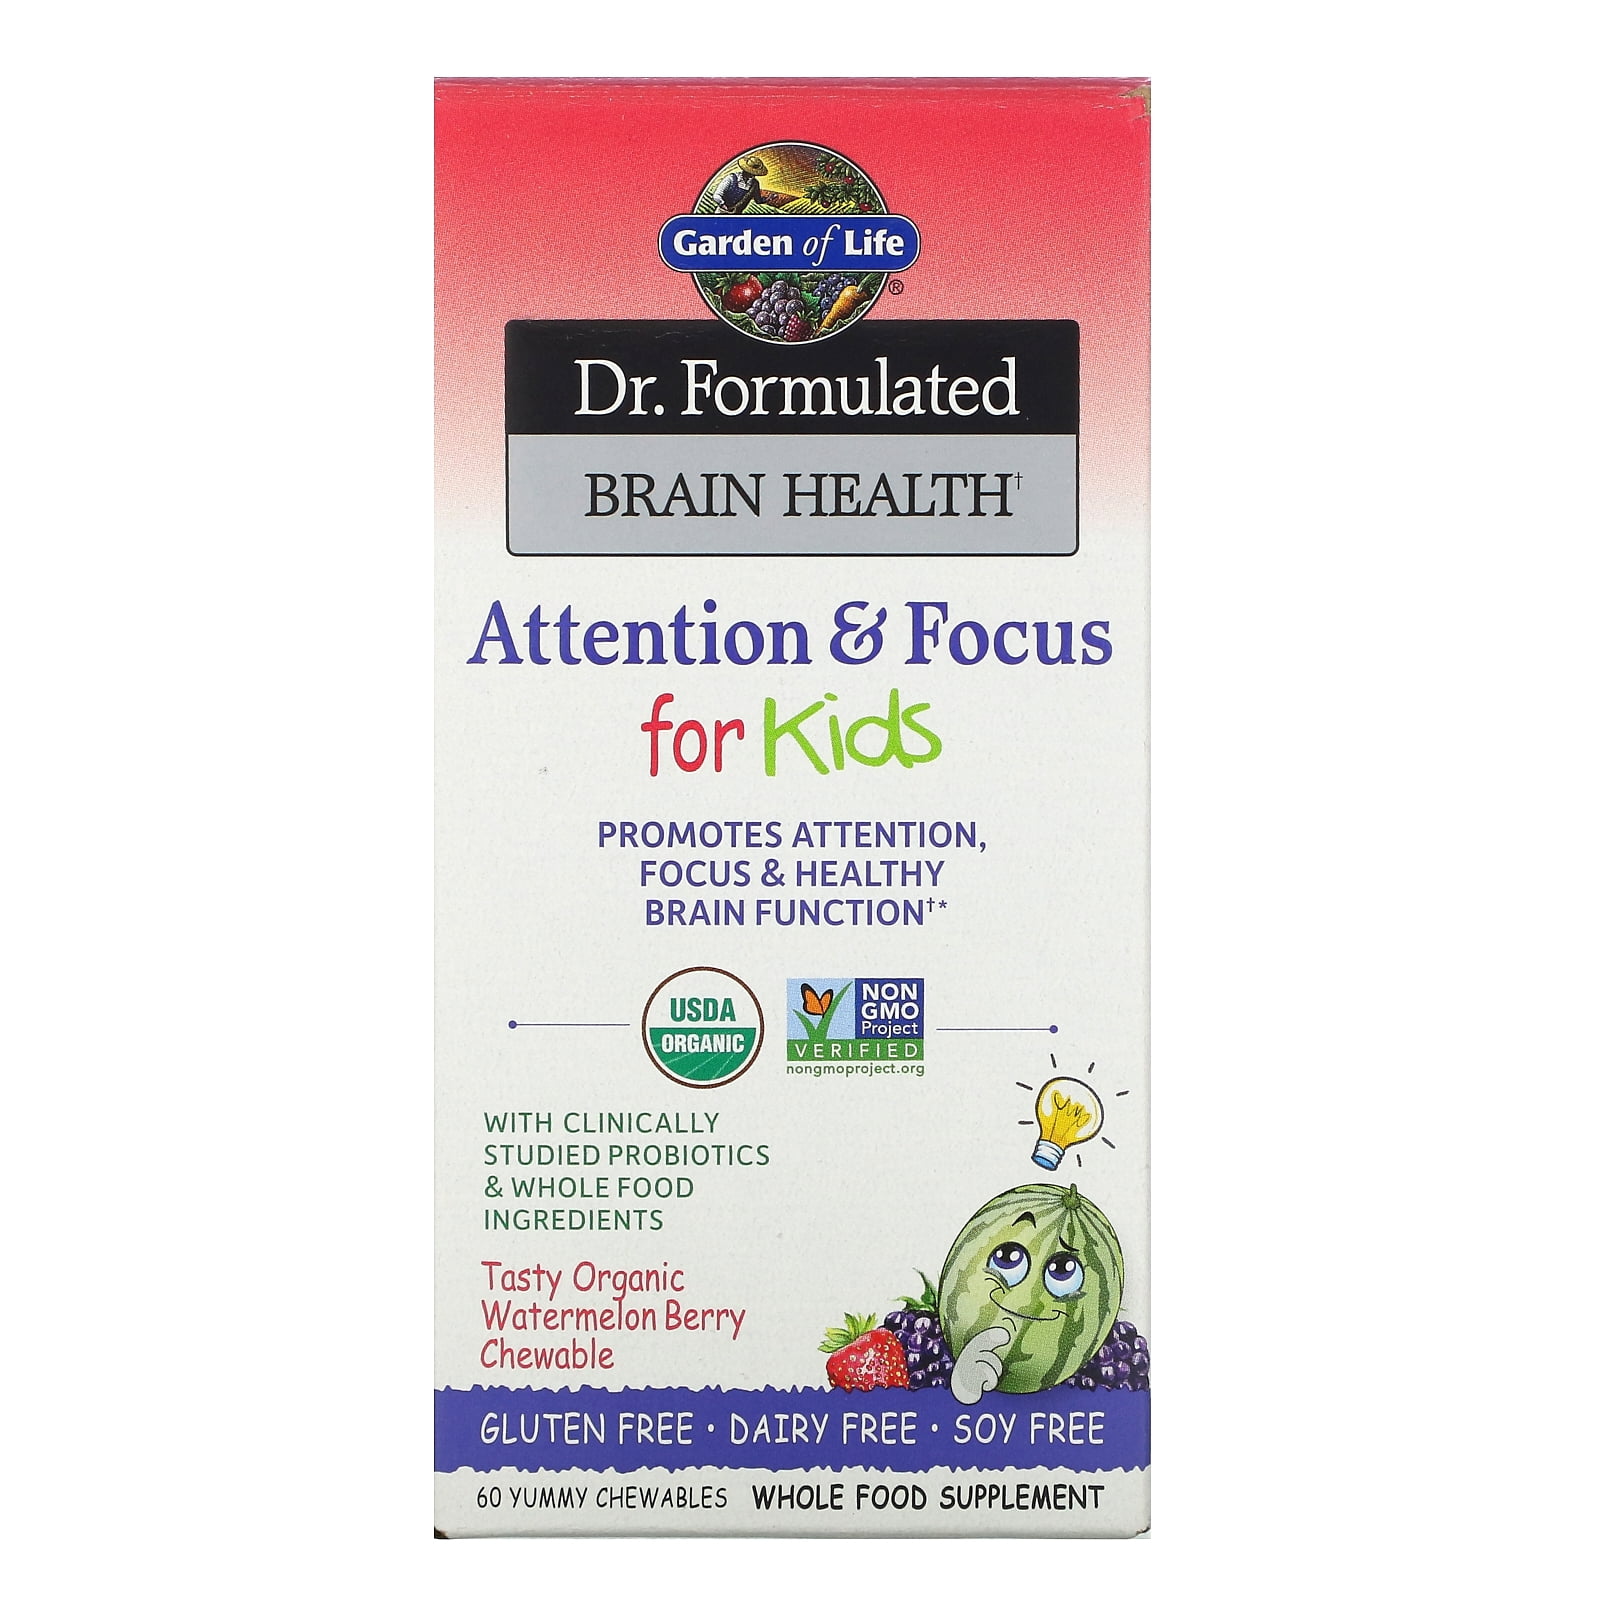 Photo 1 of Garden of Life Dr. Formulated Brain Health, Attention Focus for Kids, Organic Watermelon Berry, 60 Yummy Chewables